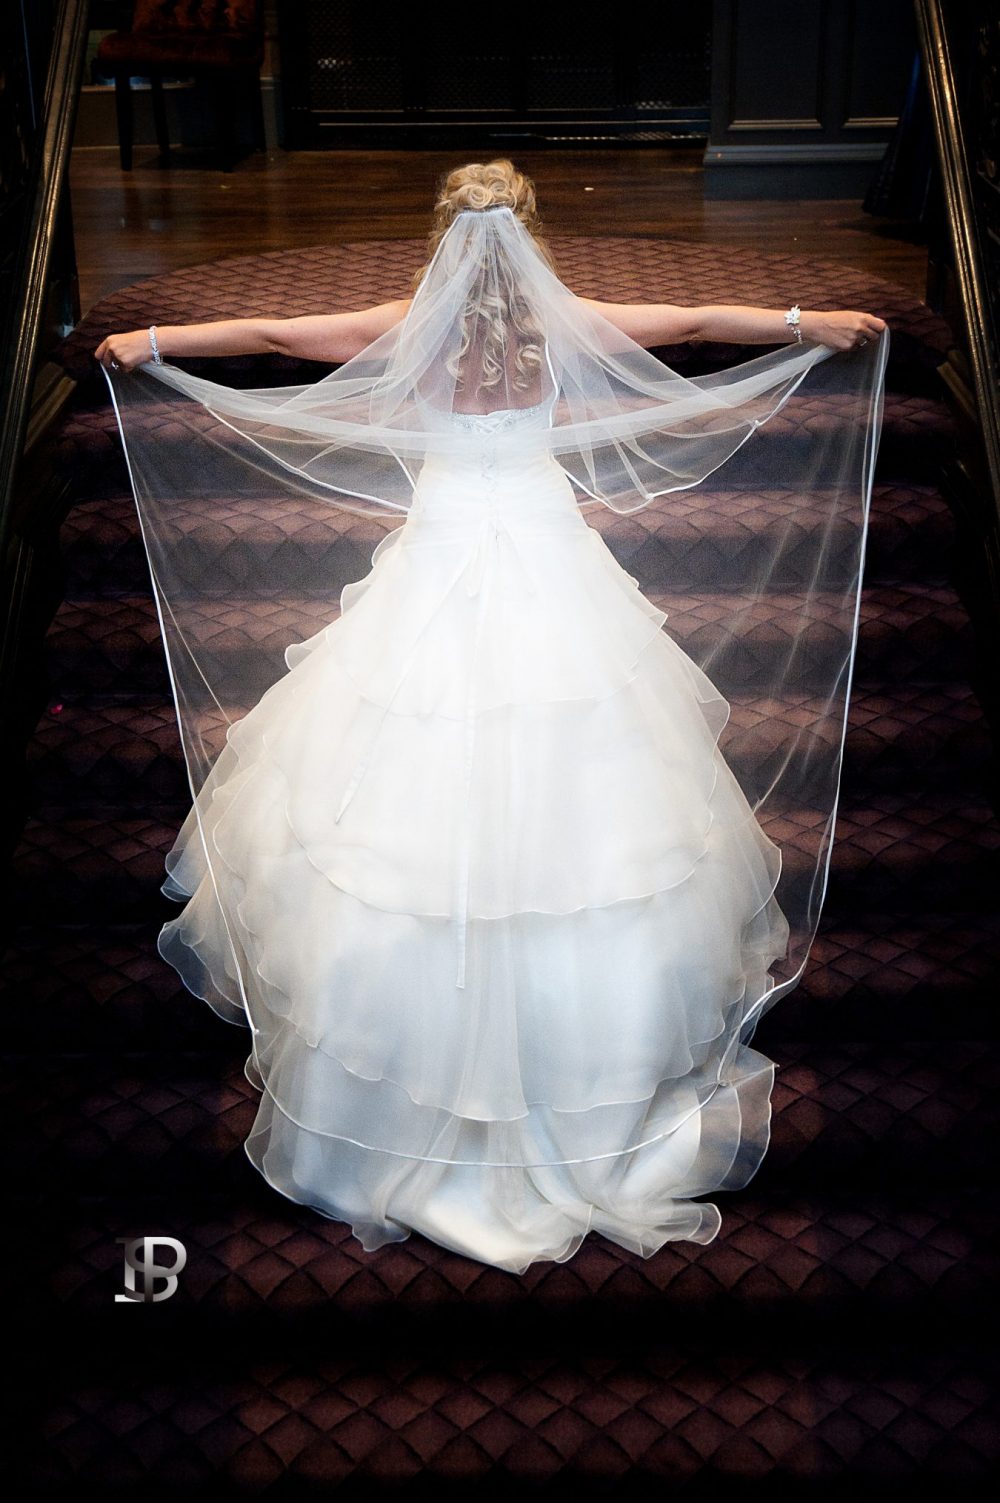 ian-scrimgeour-photography-scottish-dundee-fife-perth-wedding-photographer-bride-veil-dress-staircase